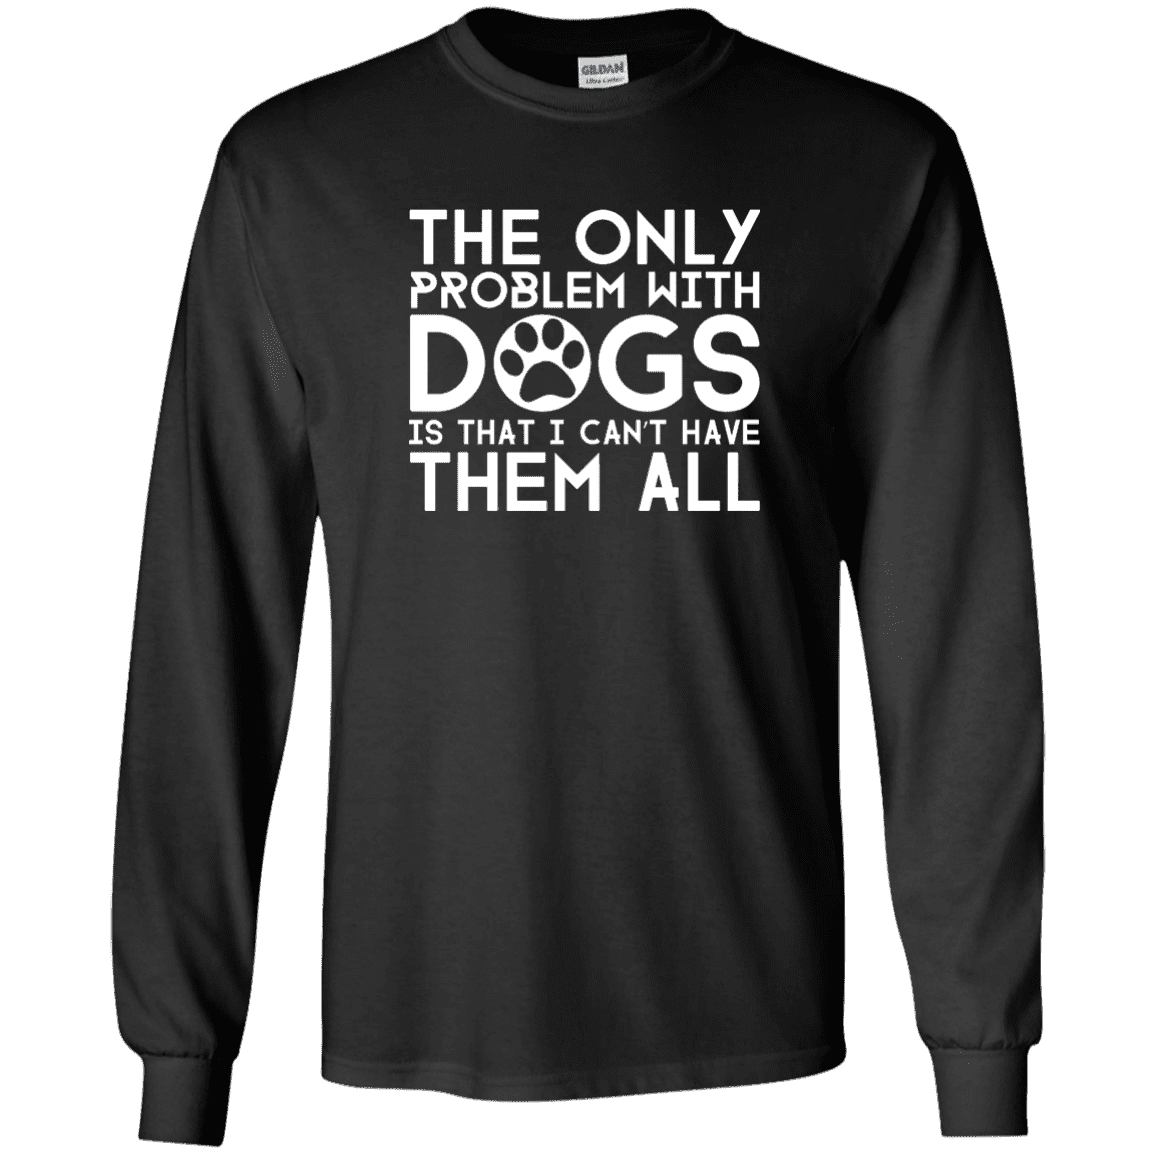 The Only Problem With Dogs - Long Sleeve T Shirt.